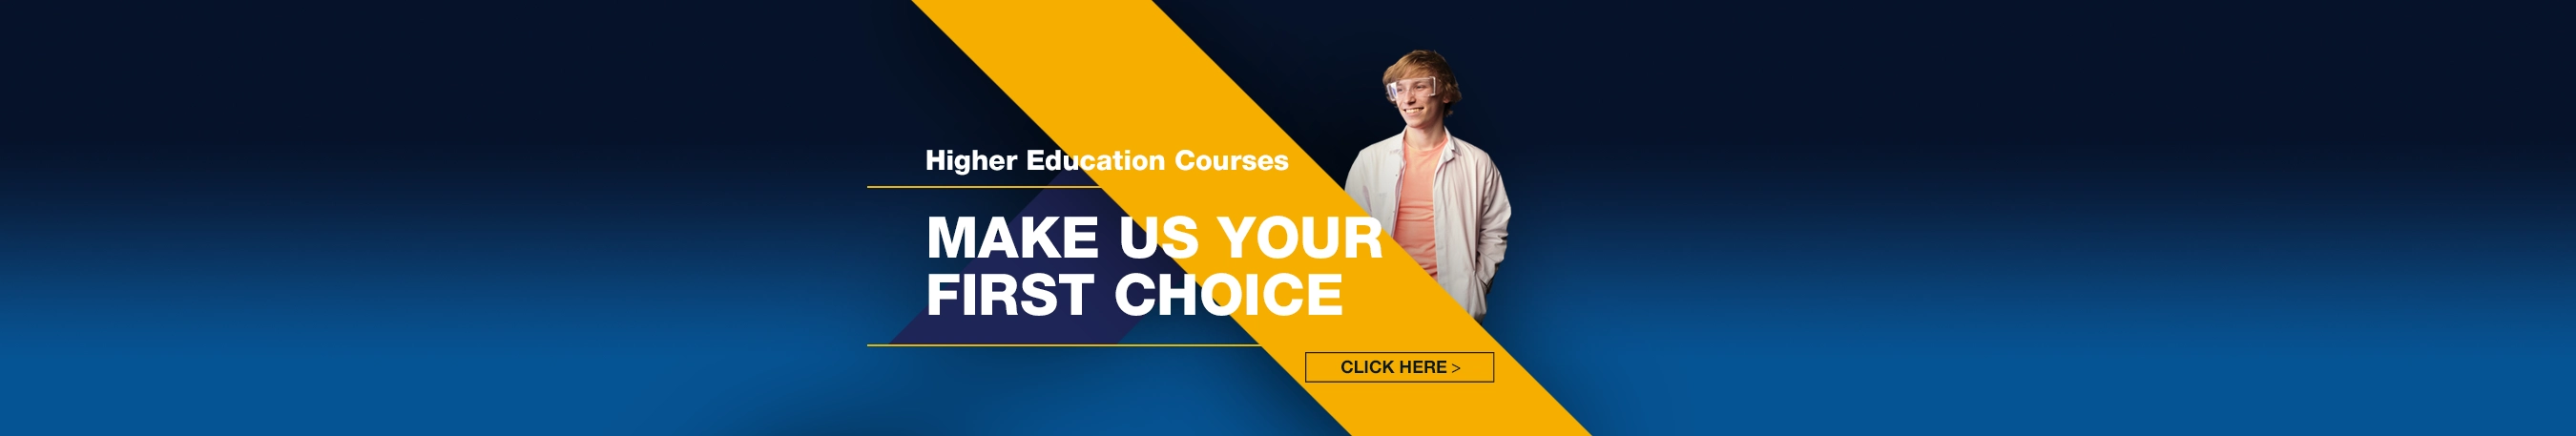 Higher Education Courses